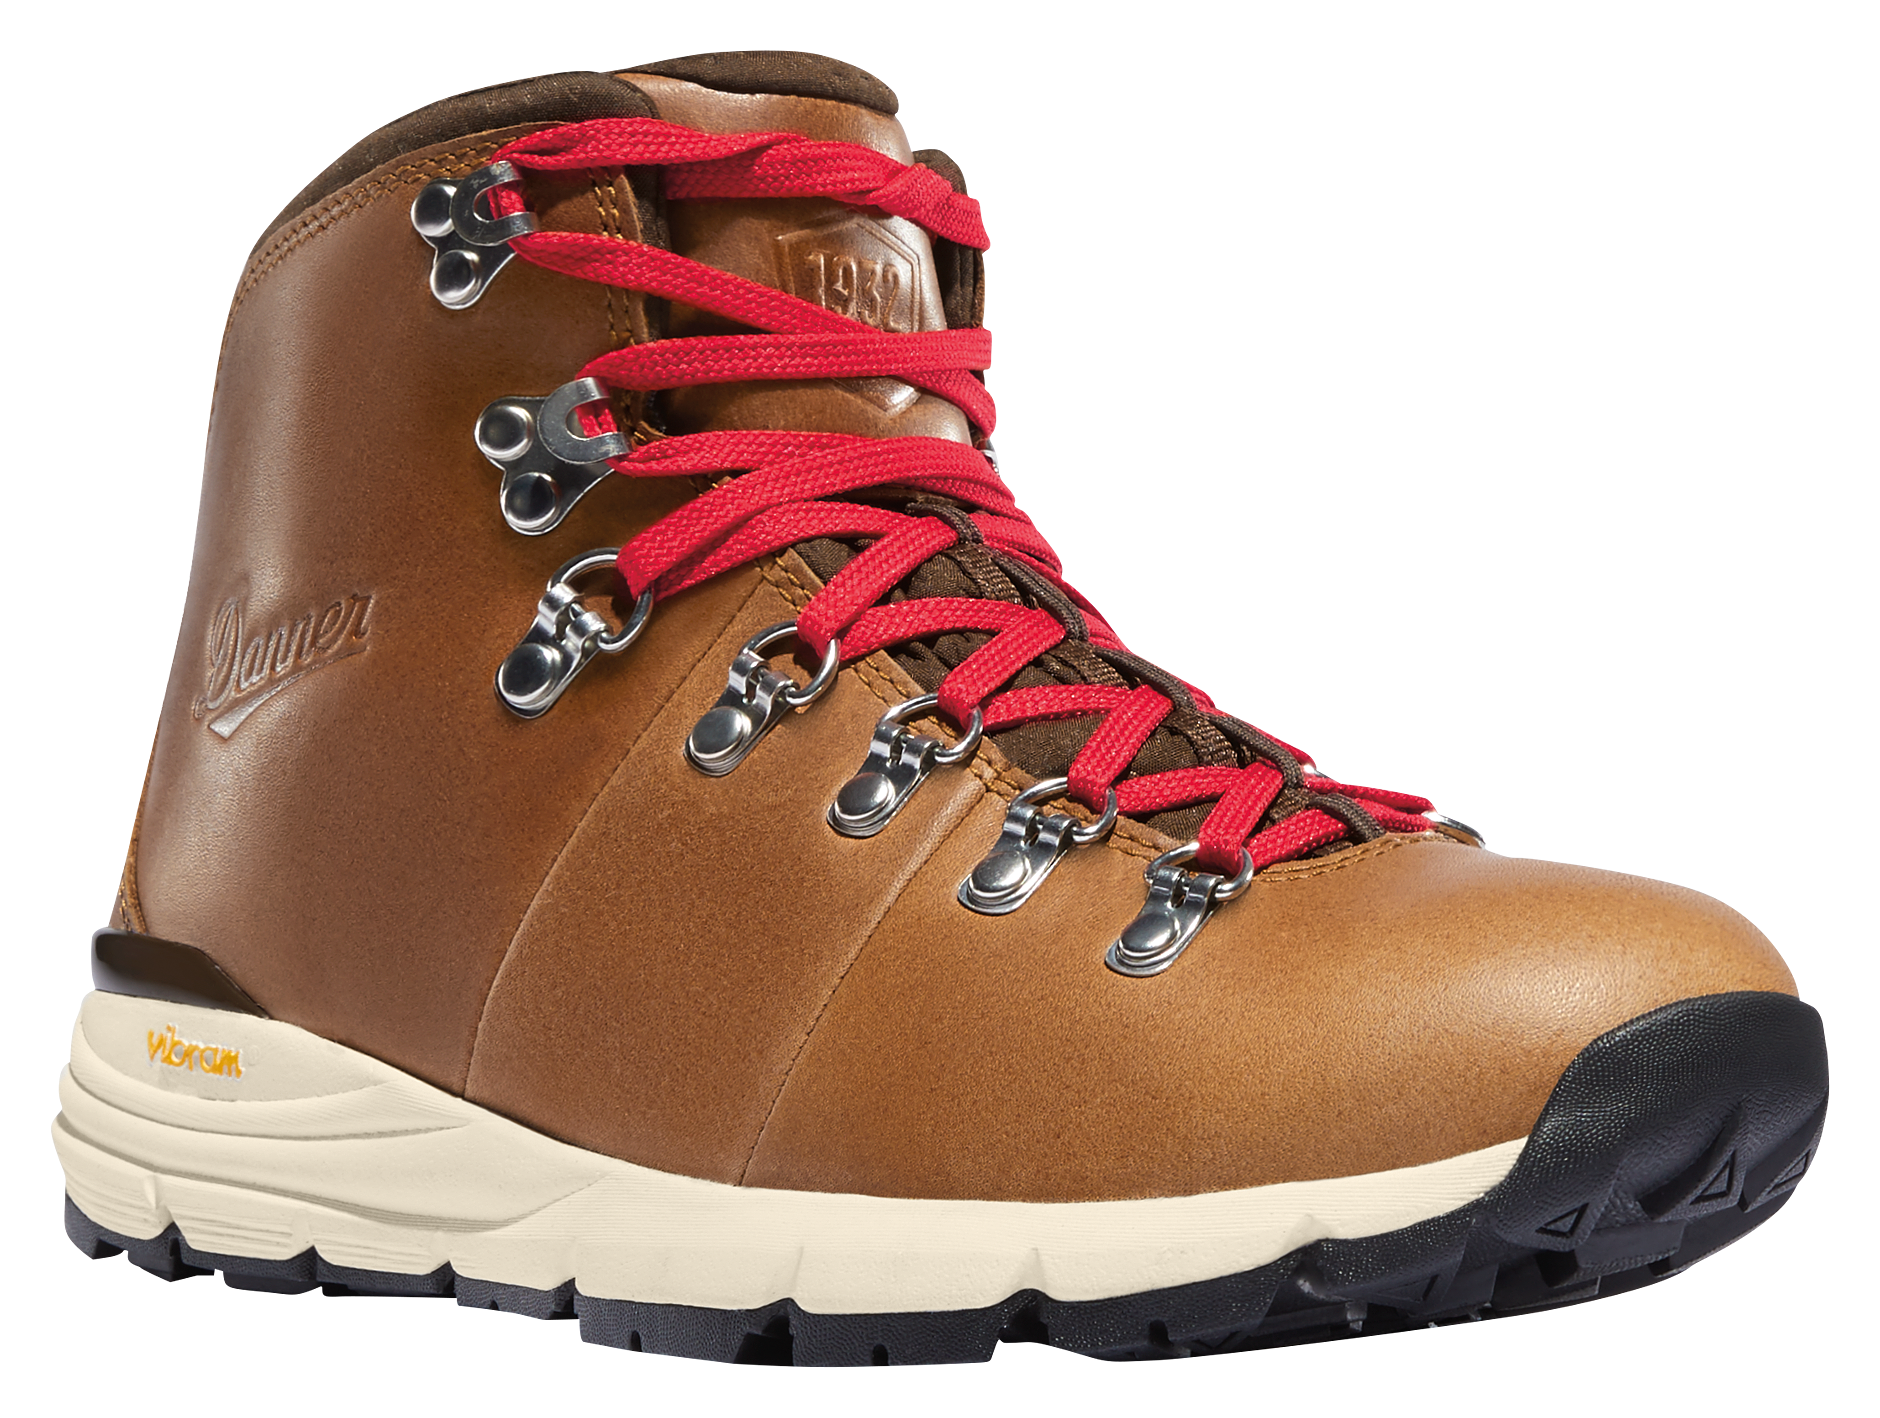 Danner Mountain 600 Leather Waterproof Hiking Boots for Ladies - Saddle Tan - 9M